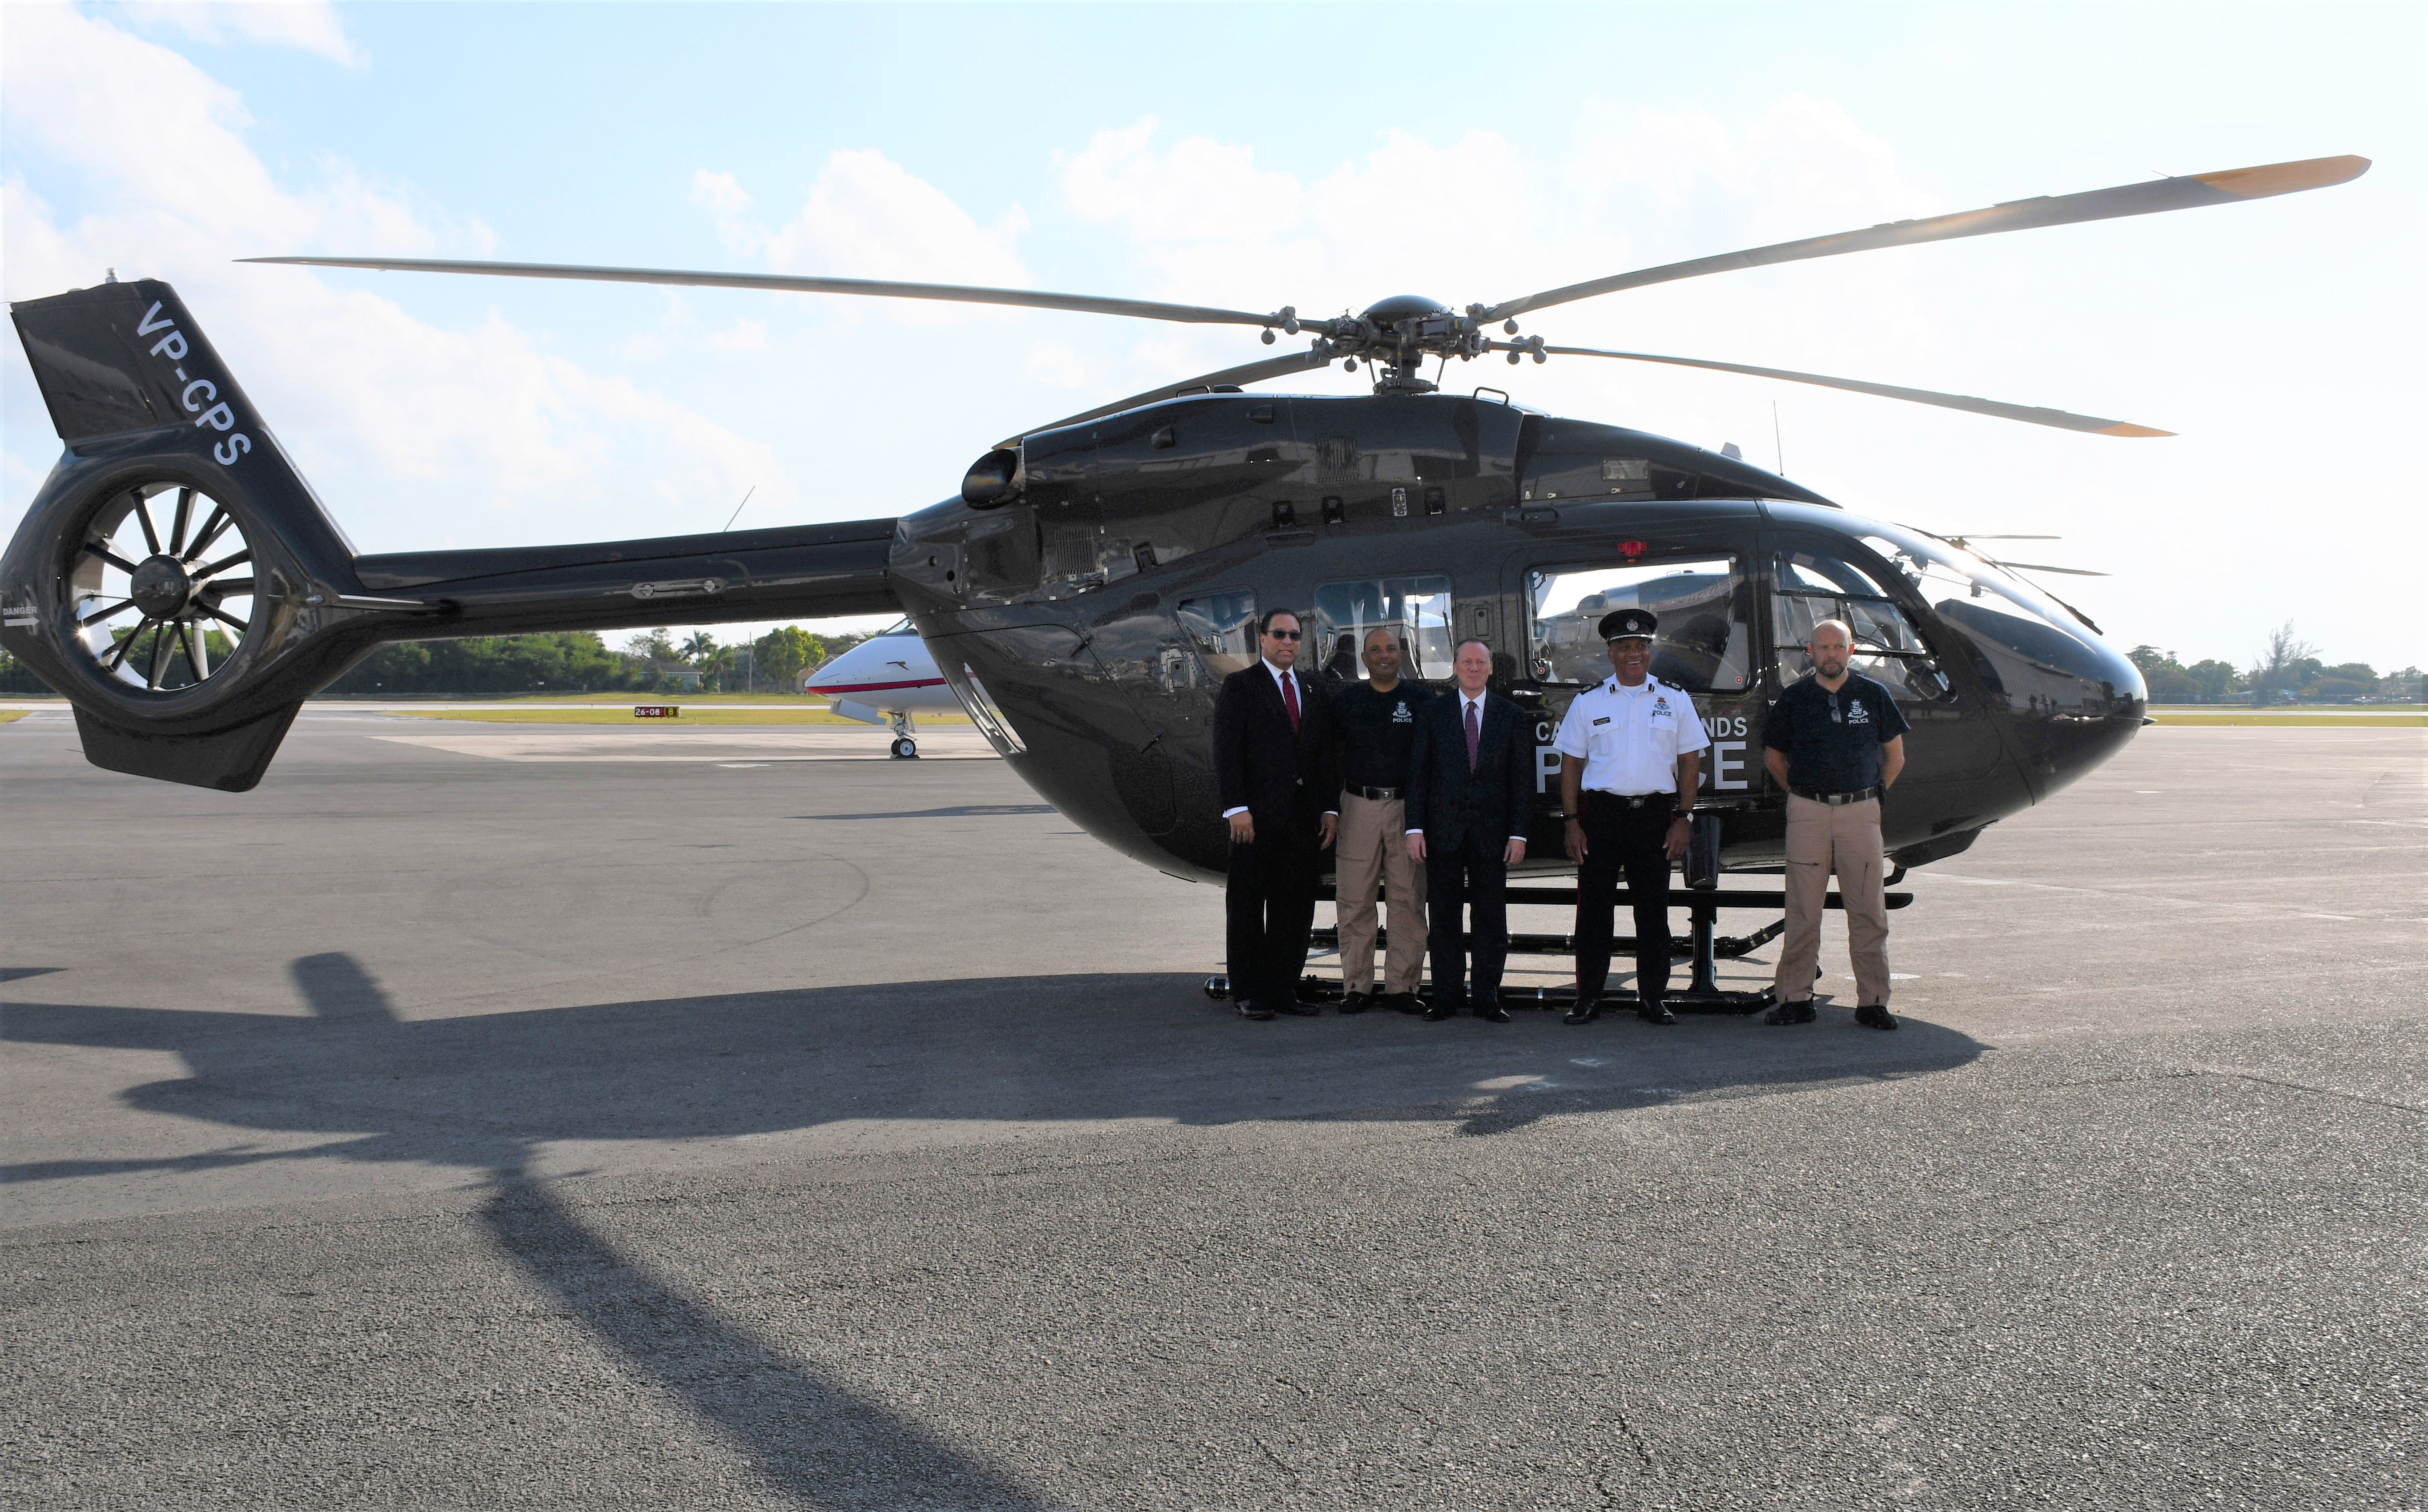 5. Governor, Premier and RCIPS Air Operations Unit with new helicopter